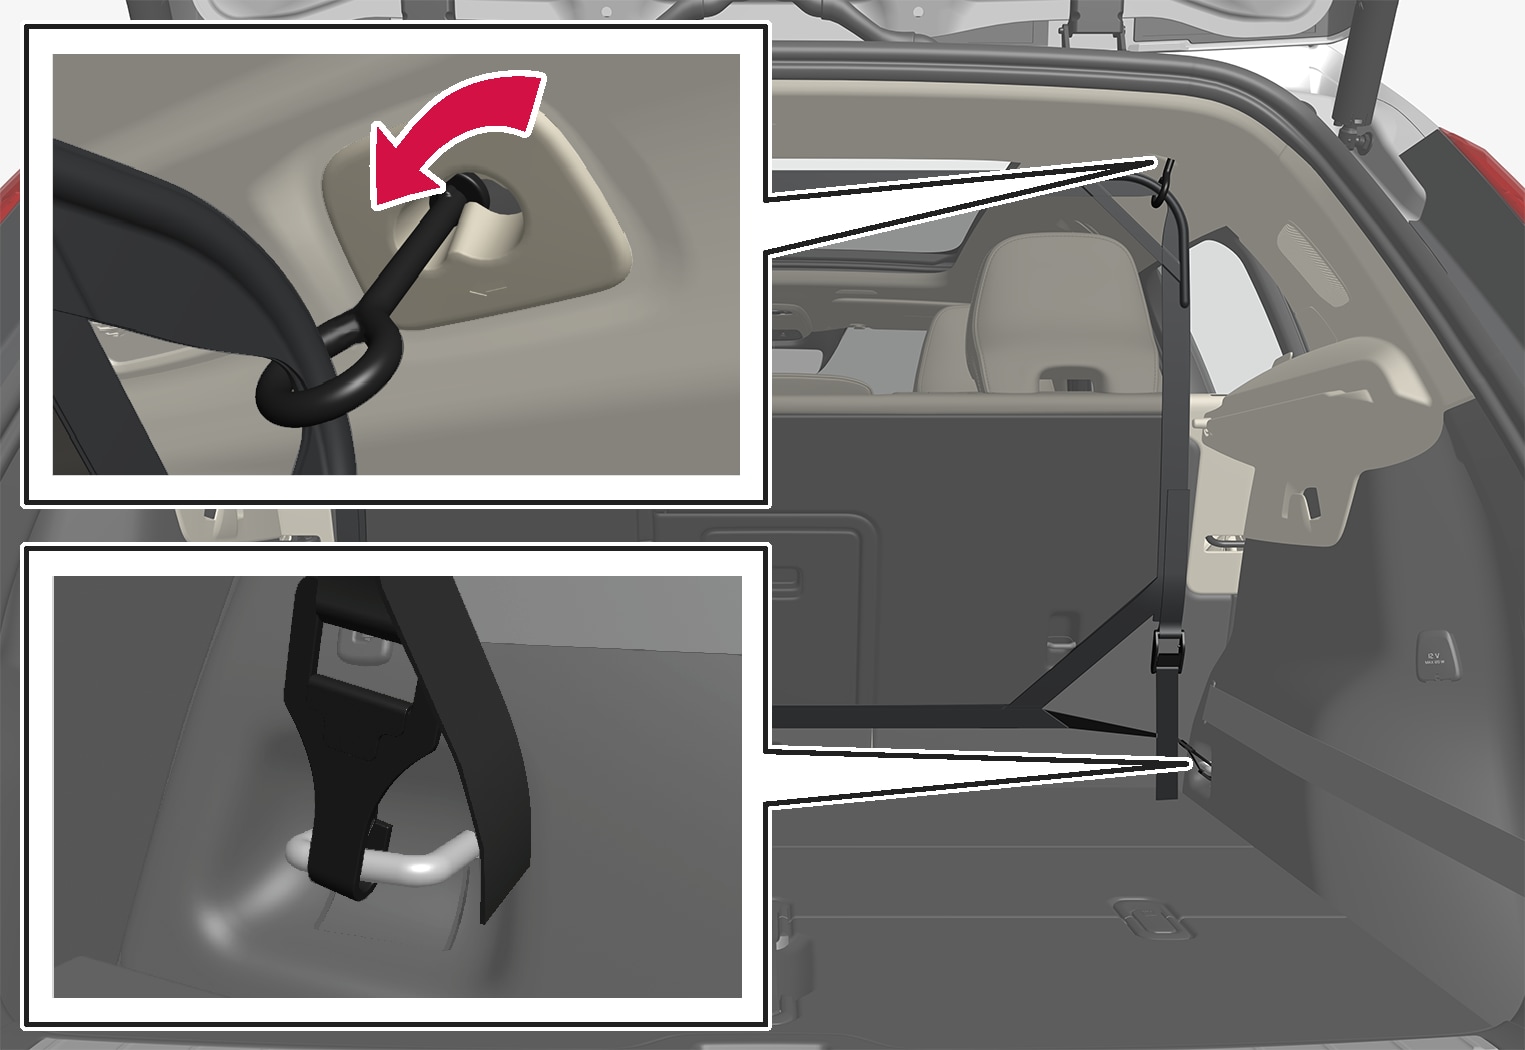 P6-1746-XC40- Safety net rear position installation